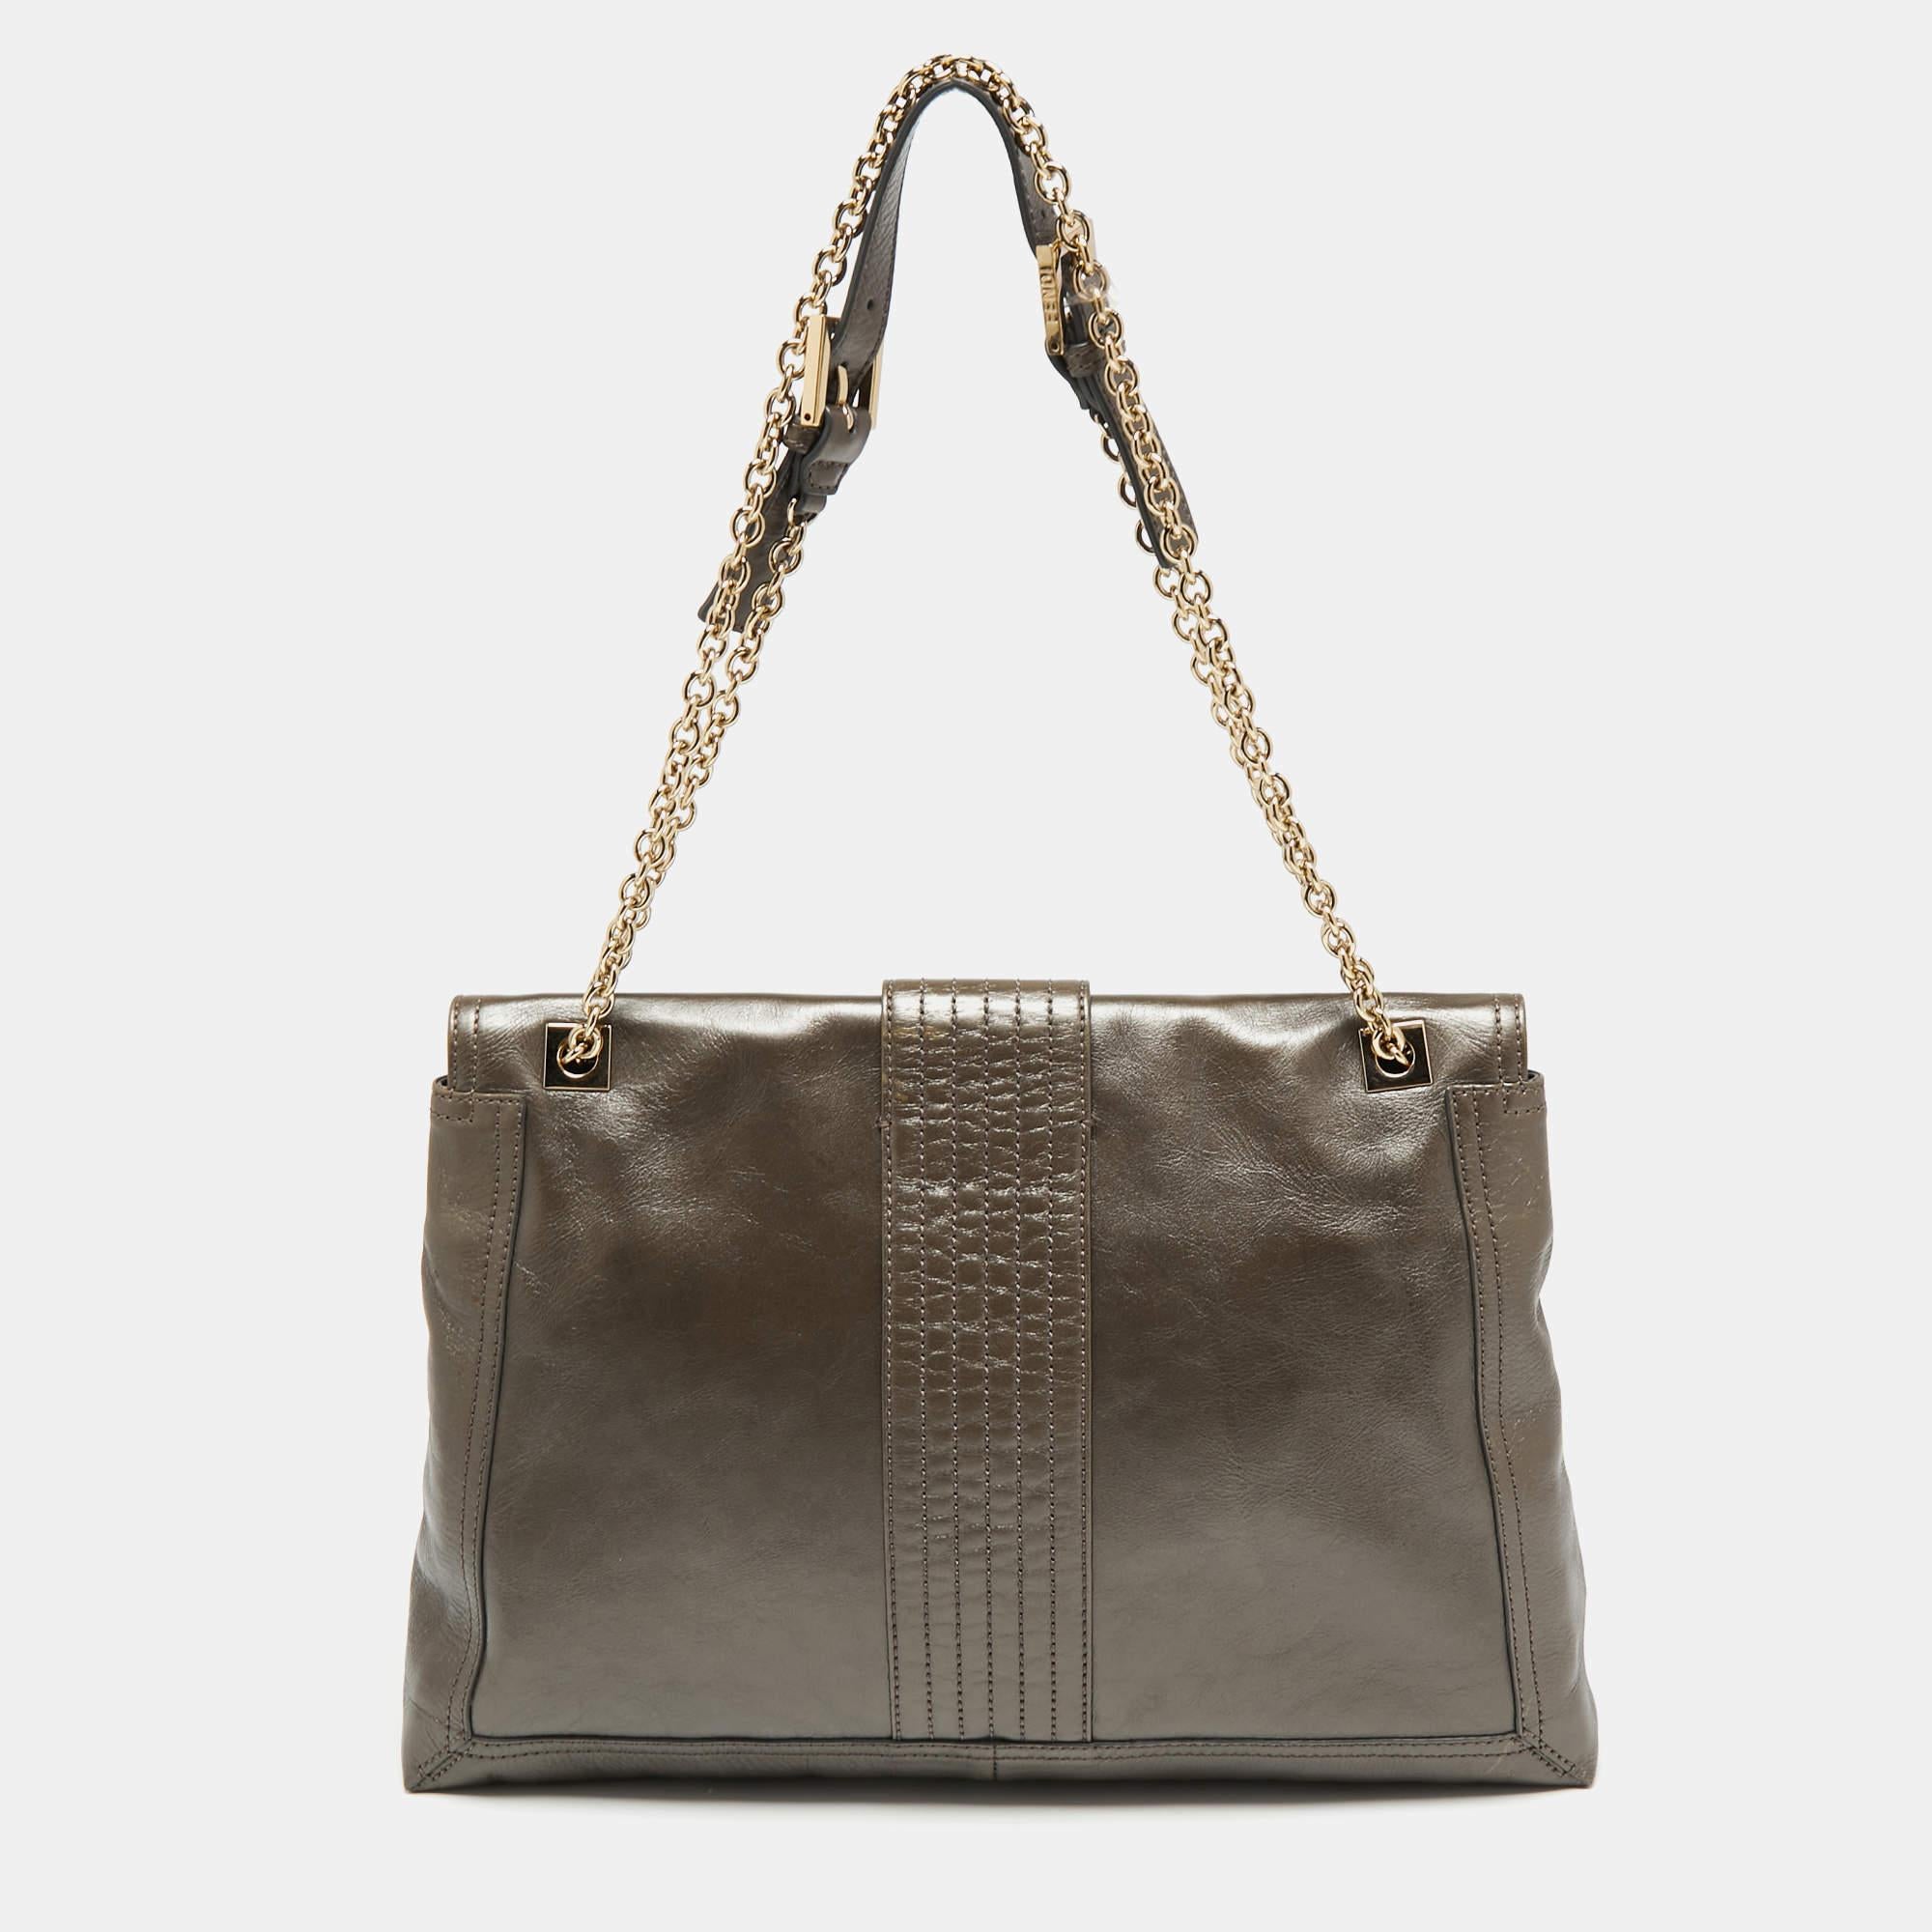 This Maxi Baguette Flap shoulder bag designed by the House of Fendi offers never-ending functionality and luxury! It is made from grey leather with a gold-tone FF accent placed on the front. It accommodates a spacious fabric-lined interior. Grab